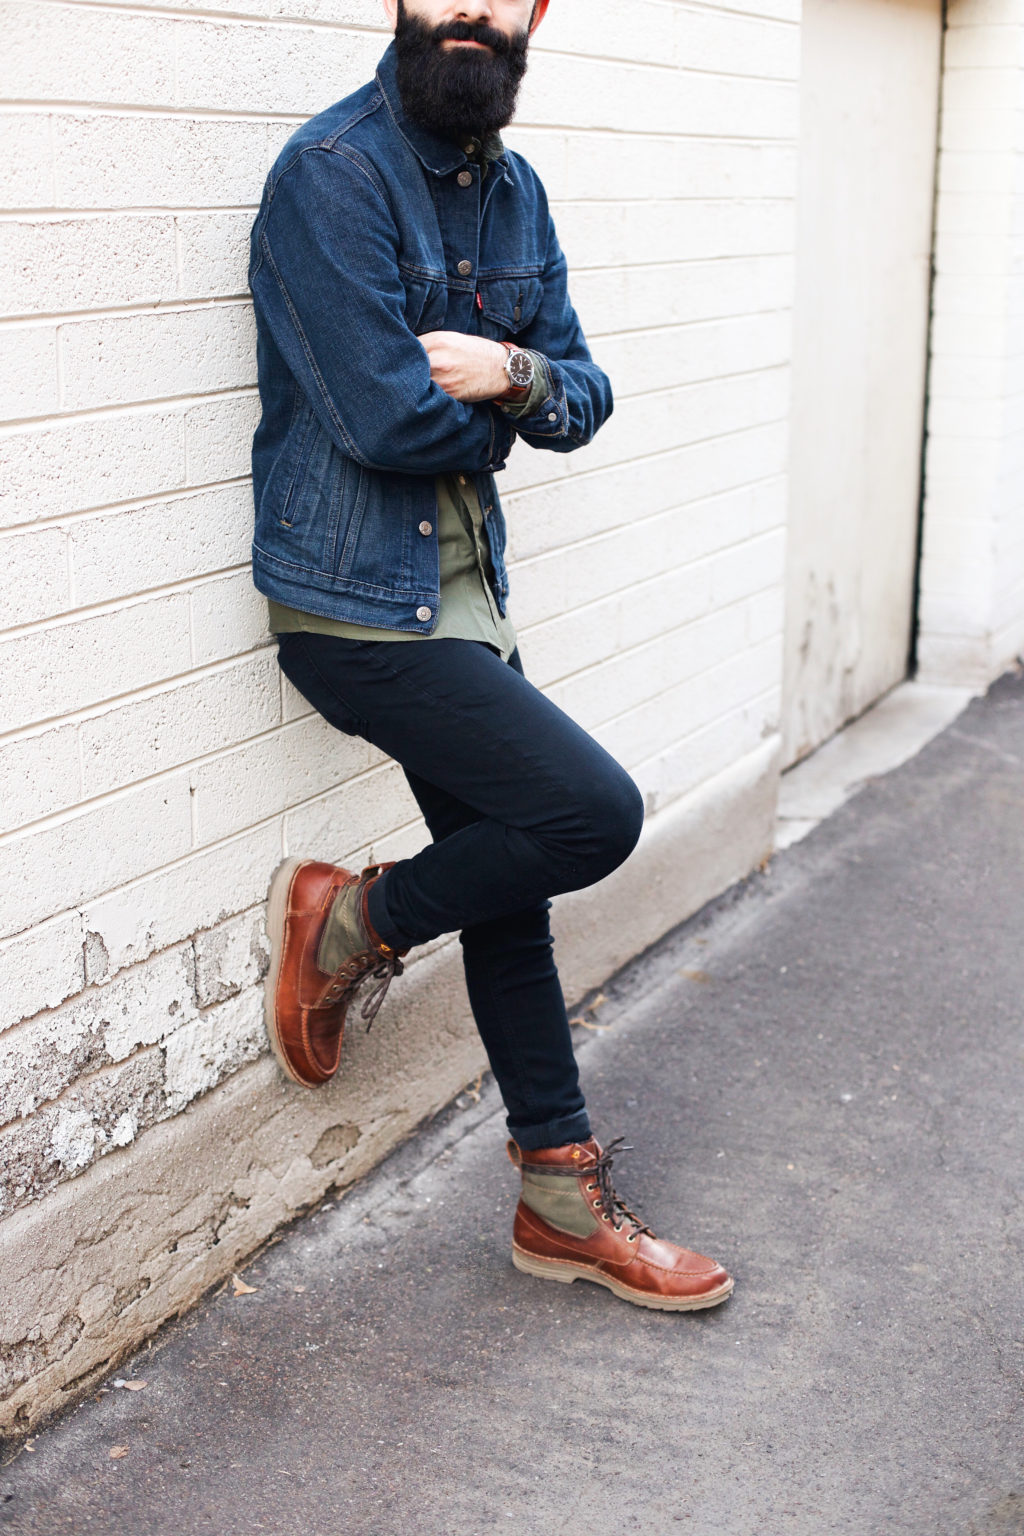 New Darlings - Men's Fall Fashion - Denim and Lace Up Clark's Boots